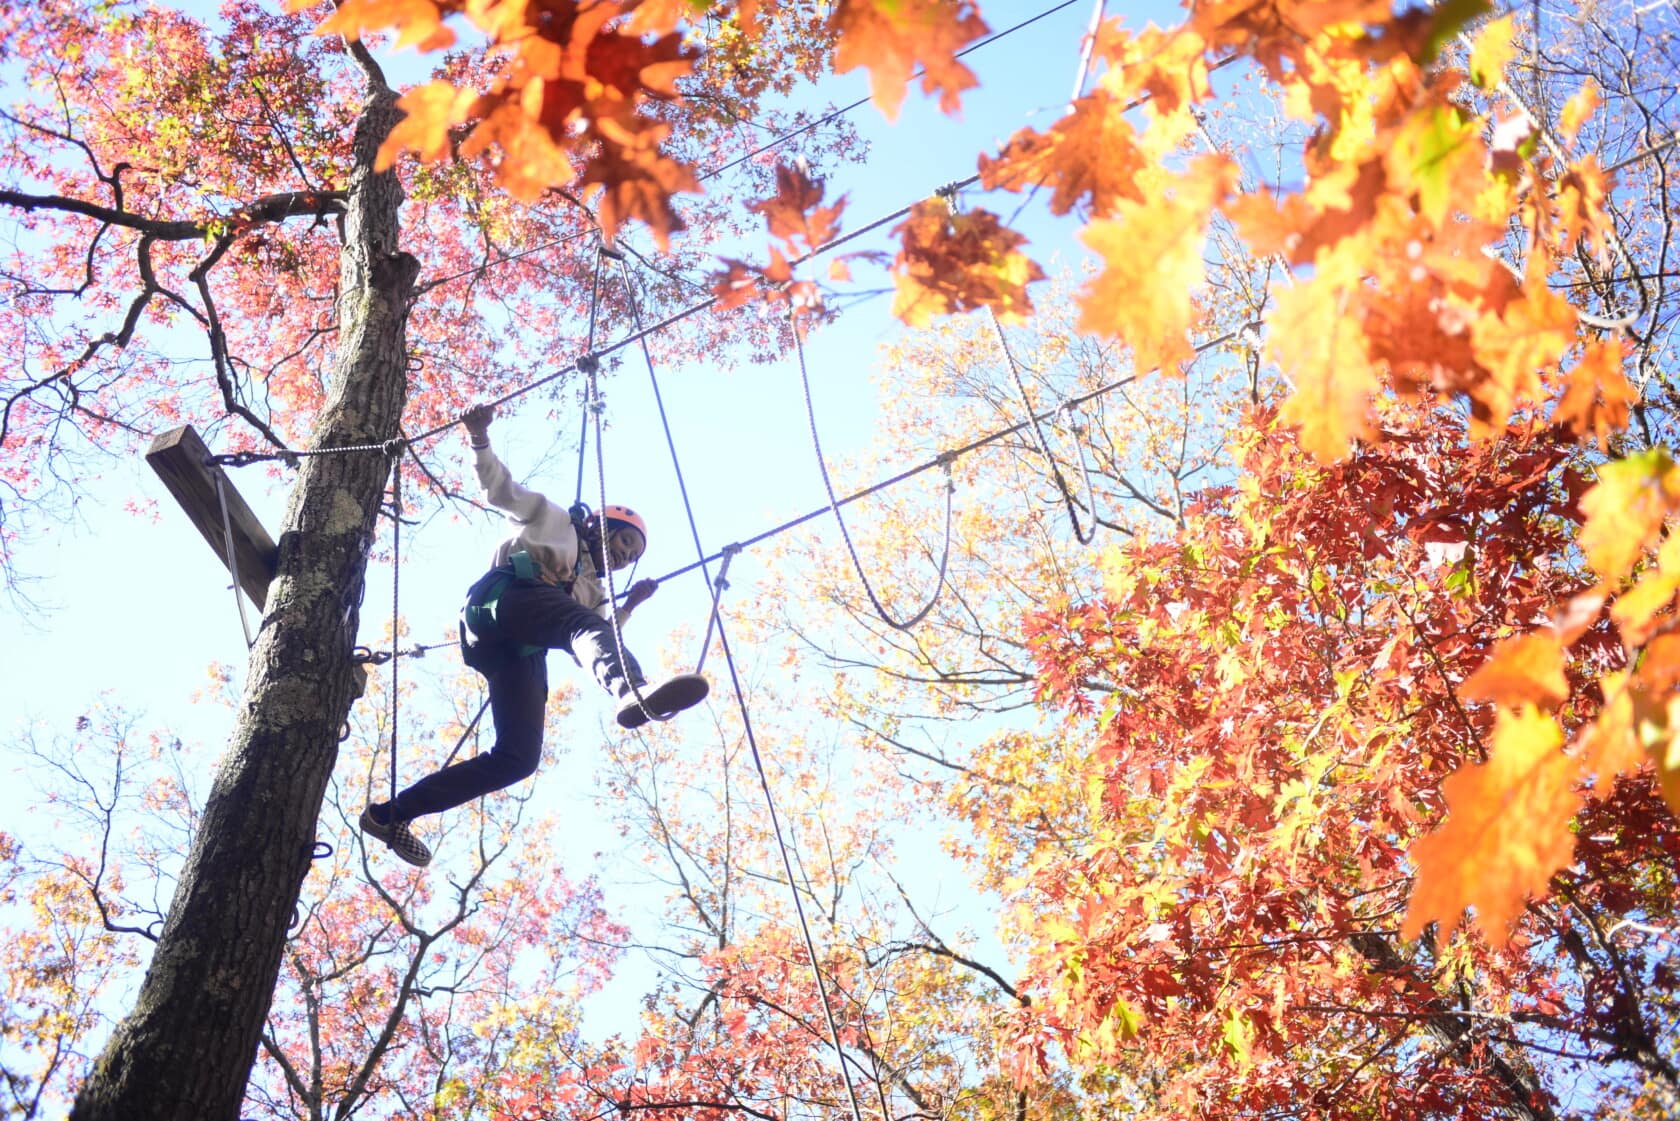 A student climbs on a high ropes element on a challenge course surrounded by fall foliage.